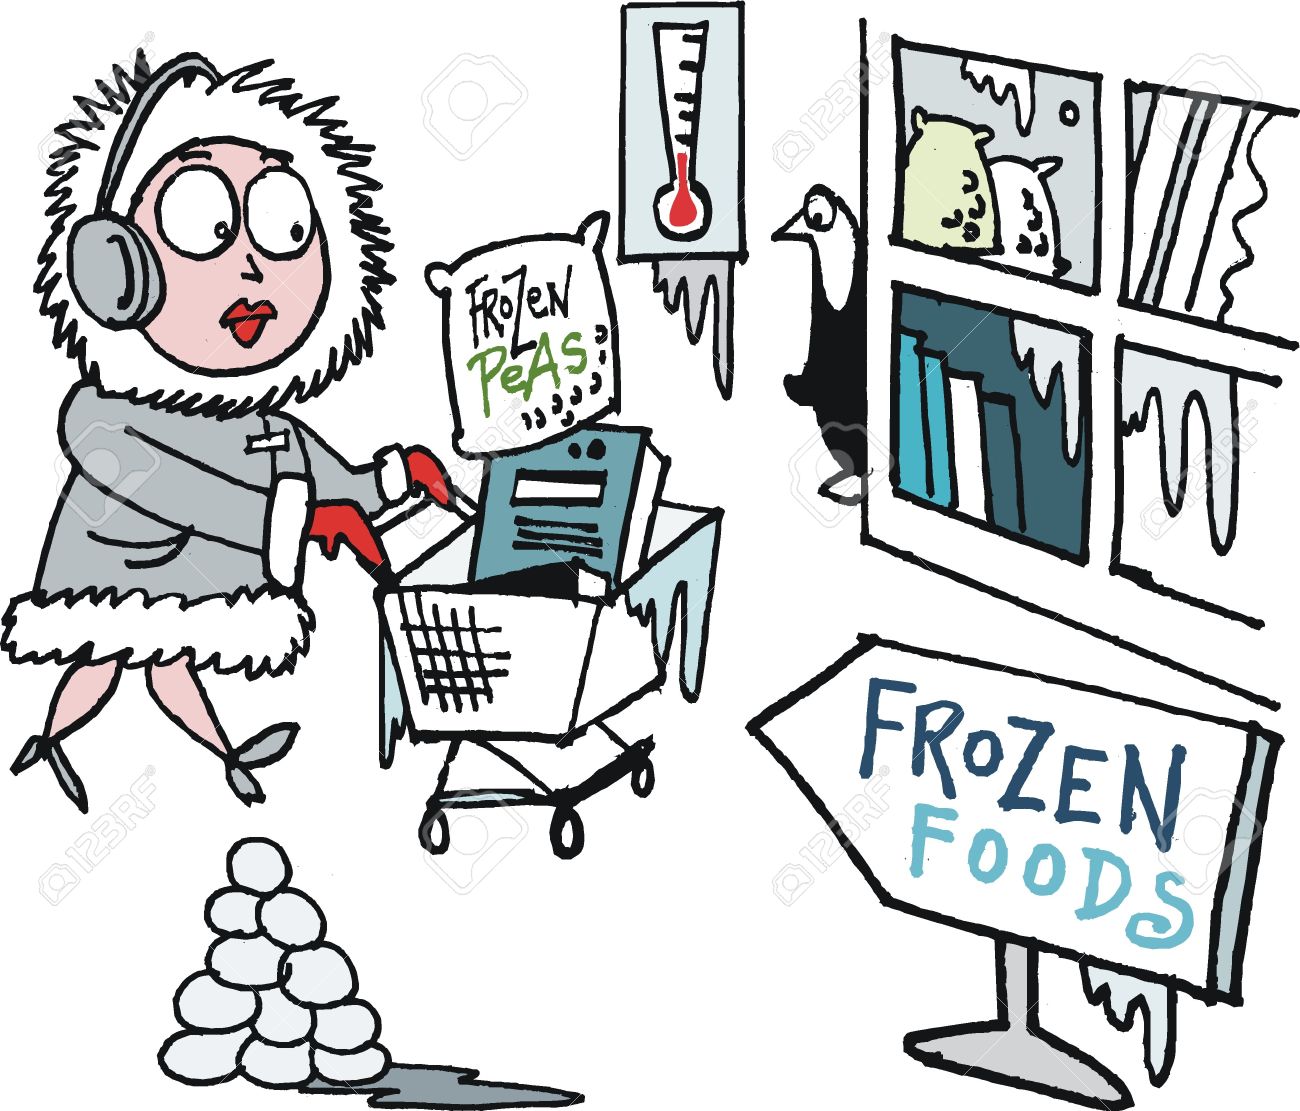 Do you get attracted towards Frozen Food Products?